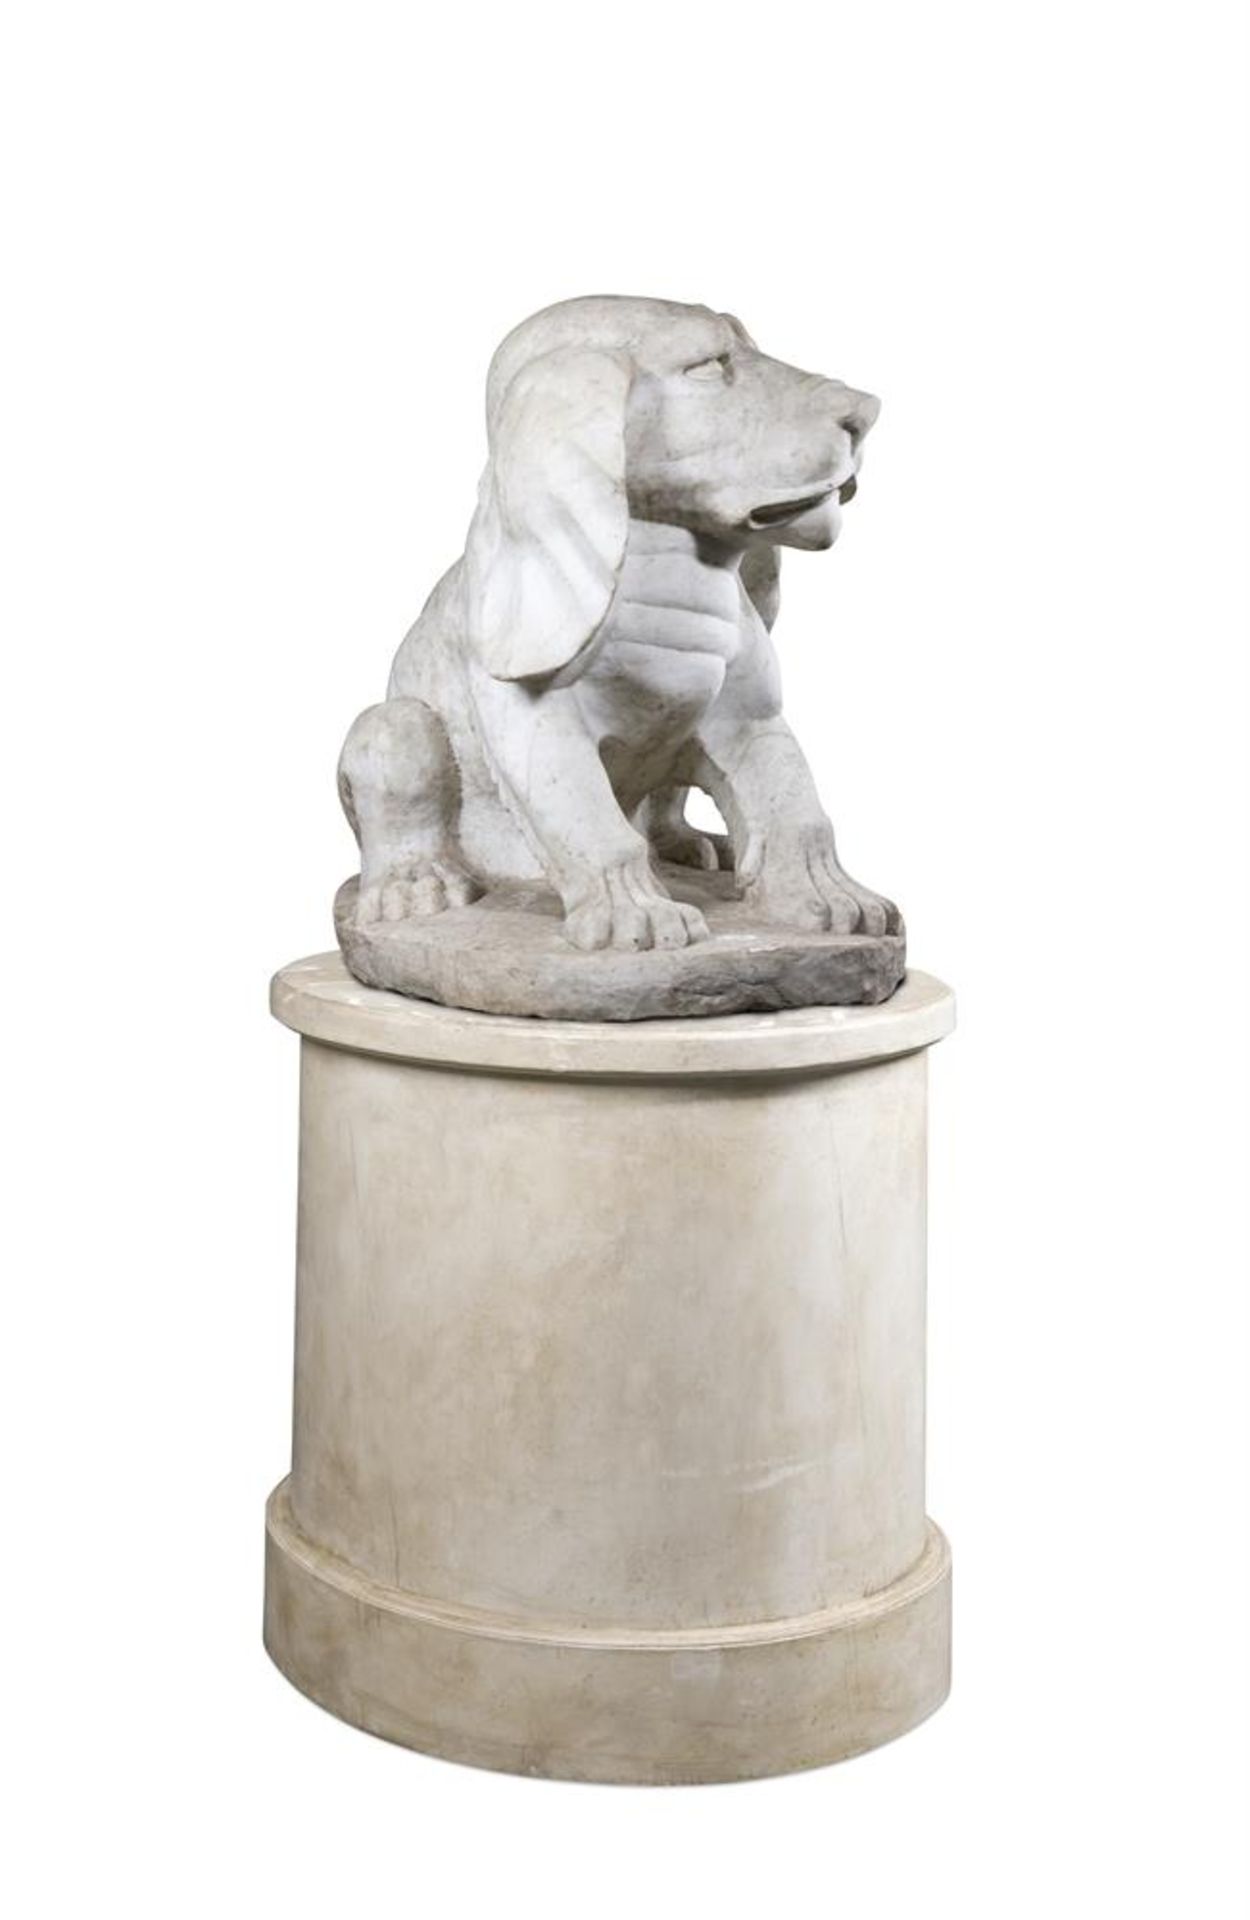 A MARBLE FIGURE OF A PUPPY ON A PAINTED WOOD PLINTH, 20TH CENTURY - Image 2 of 3